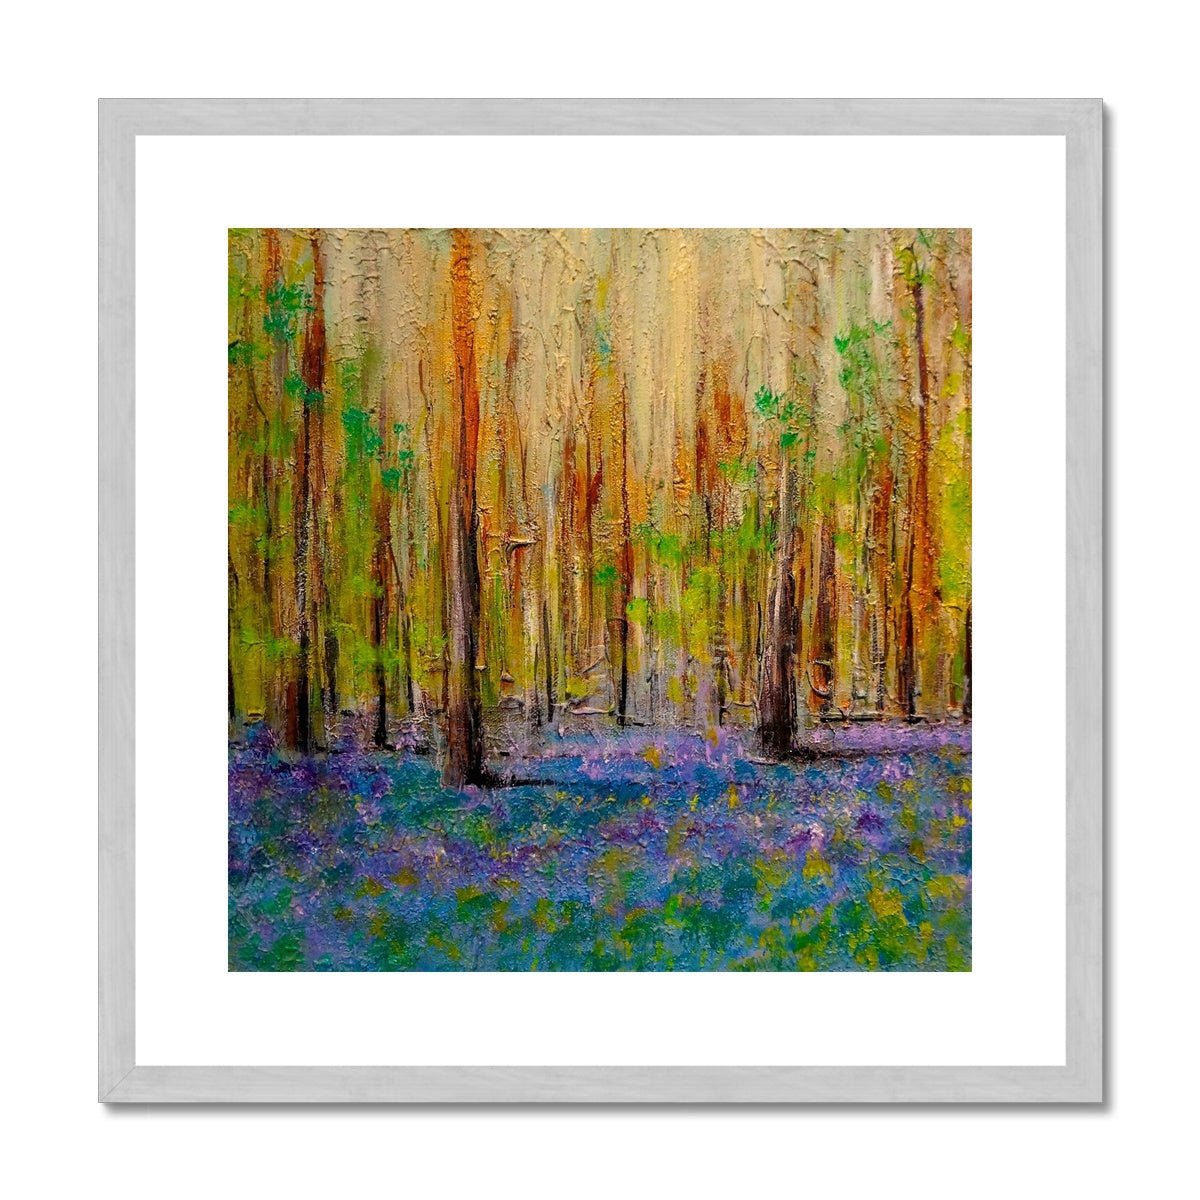 Highland Bluebells Painting | Antique Framed & Mounted Prints From Scotland-Antique Framed & Mounted Prints-Scottish Highlands & Lowlands Art Gallery-20"x20"-Silver Frame-Paintings, Prints, Homeware, Art Gifts From Scotland By Scottish Artist Kevin Hunter